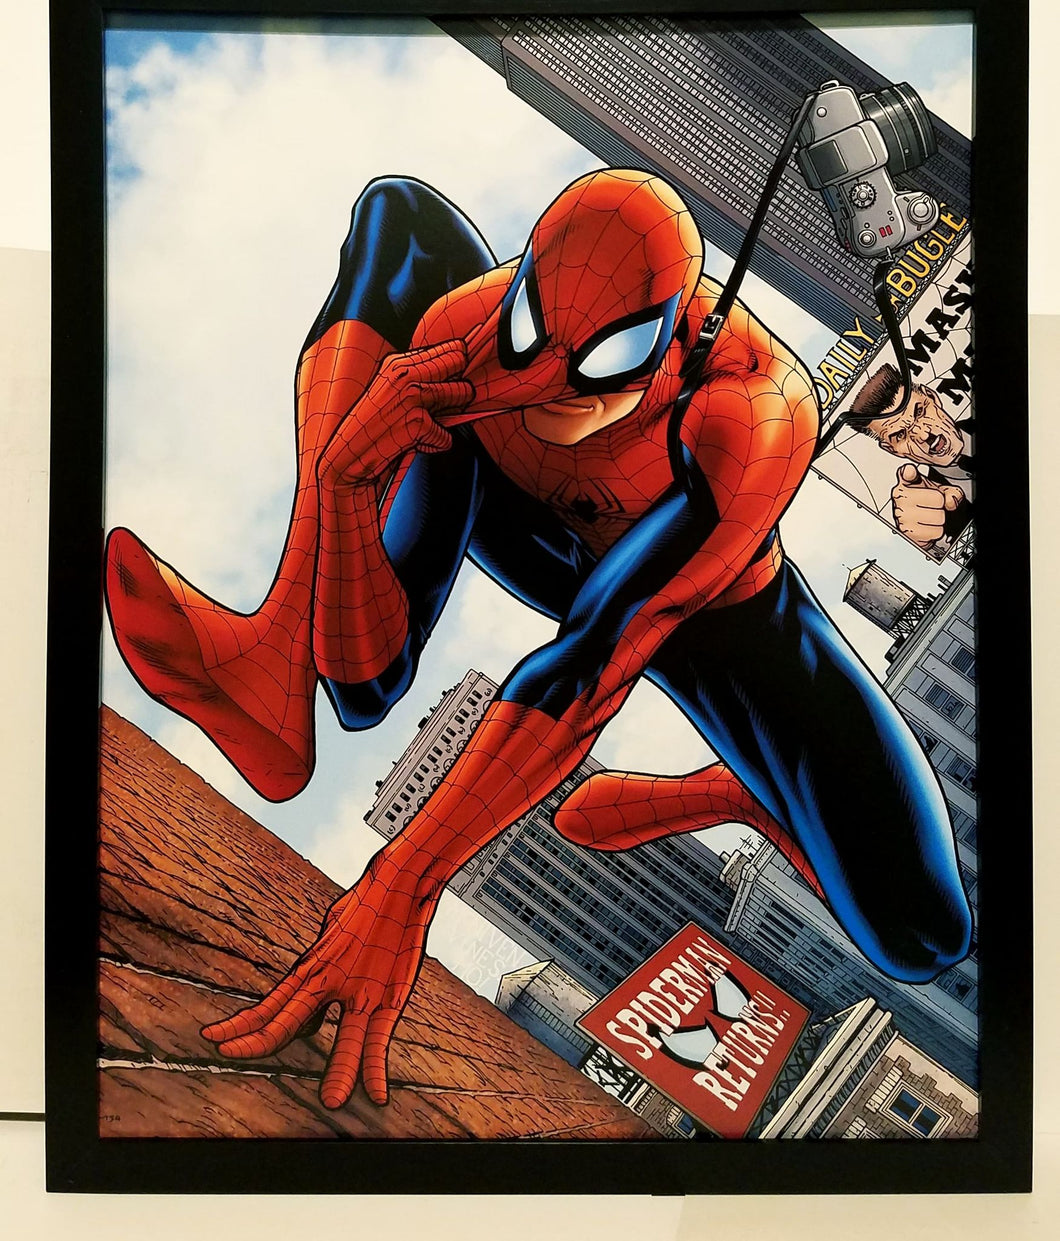 Amazing Spider-Man #546 One More Day 11x14 FRAMED Marvel Comics Art Print Poster